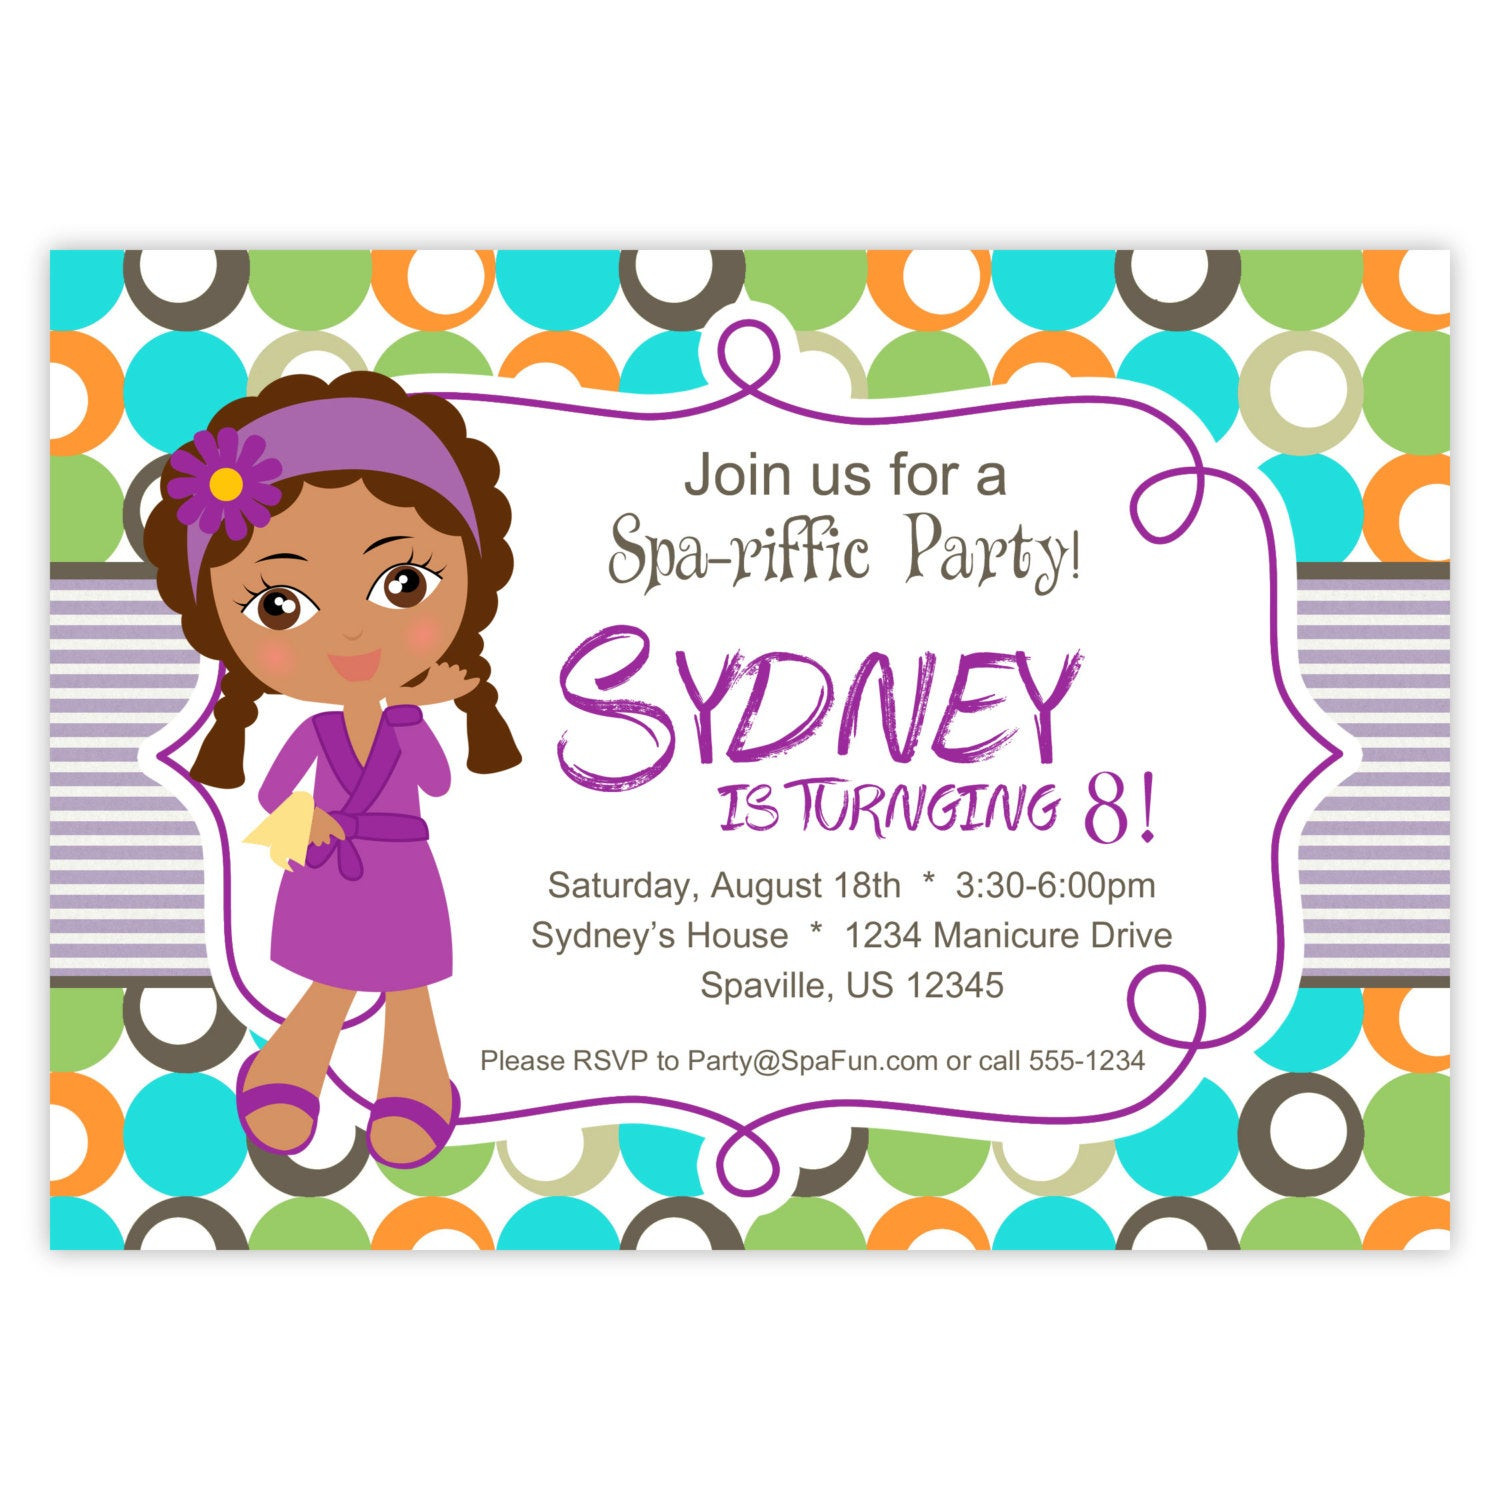 Spa Birthday Party Invitations
 Spa Party Invitation Lime Turquoise and Orange Polka Dots